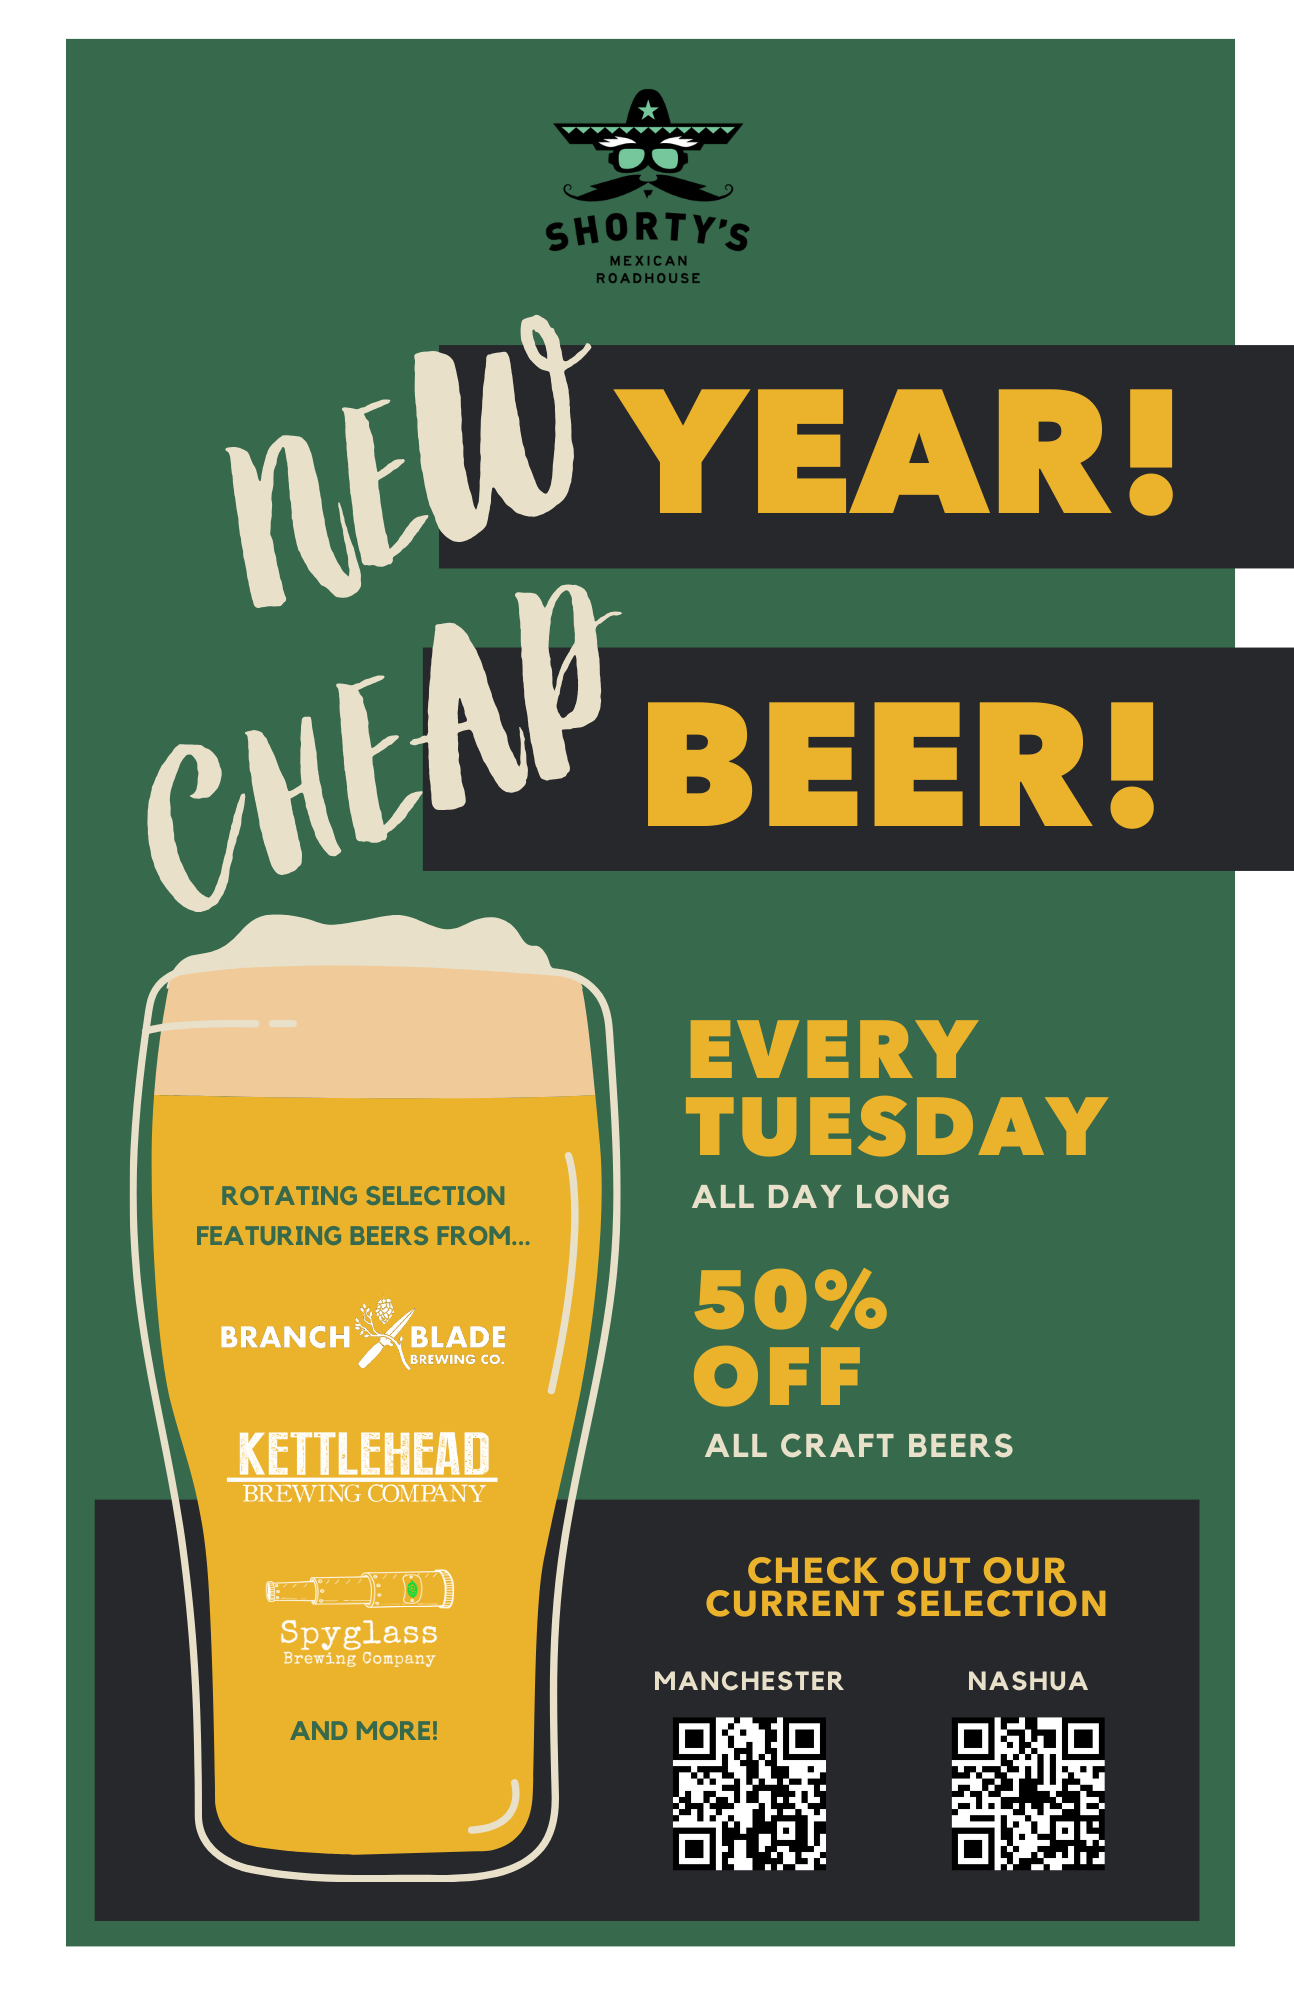 New Year, Cheap Beer - 50% Off Craft Beers Every Tuesday